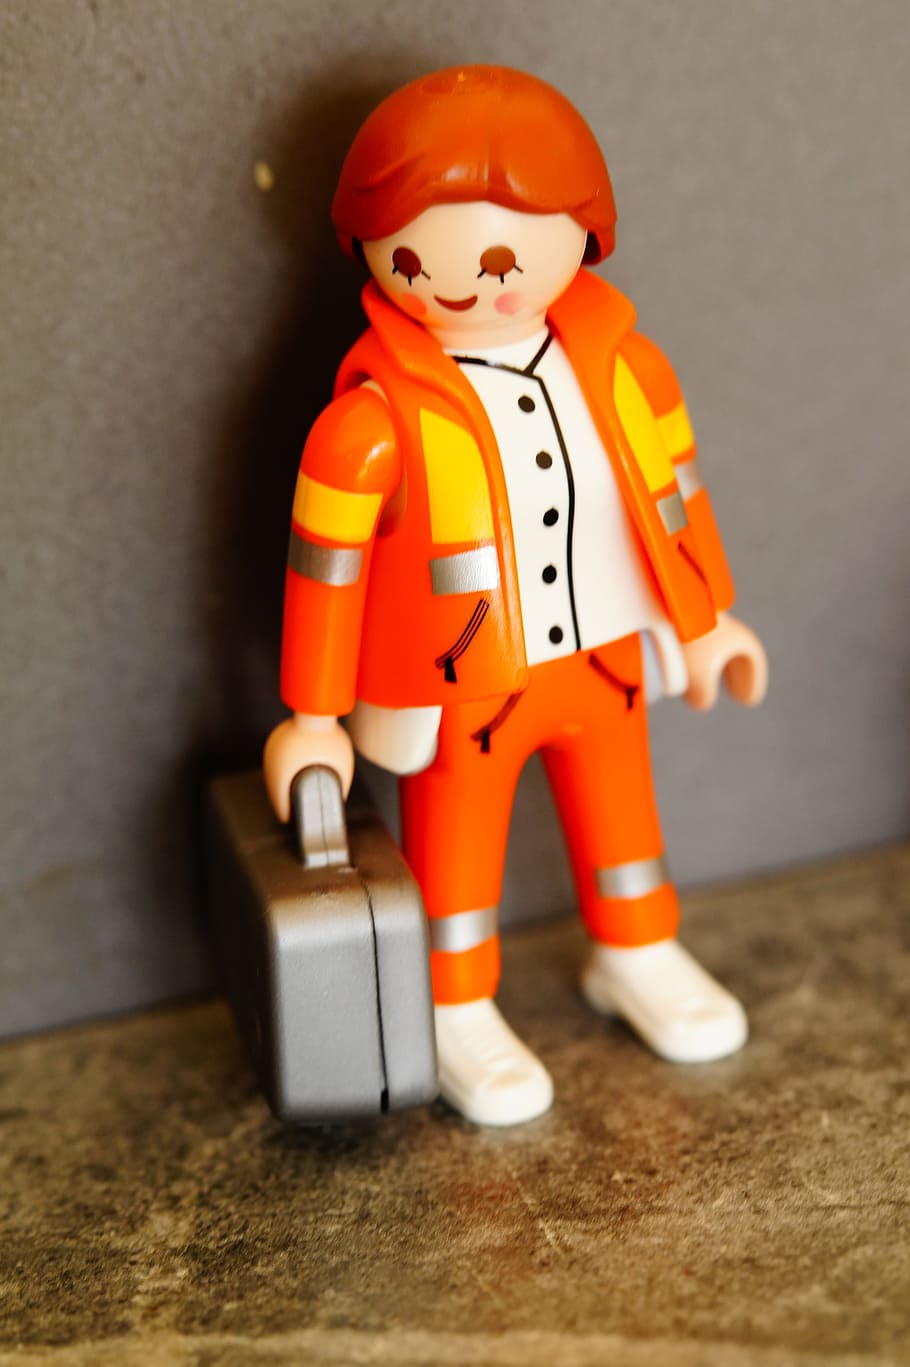 human in orange suit toy, medic, paramedic, doctor on call, emergency, HD wallpaper